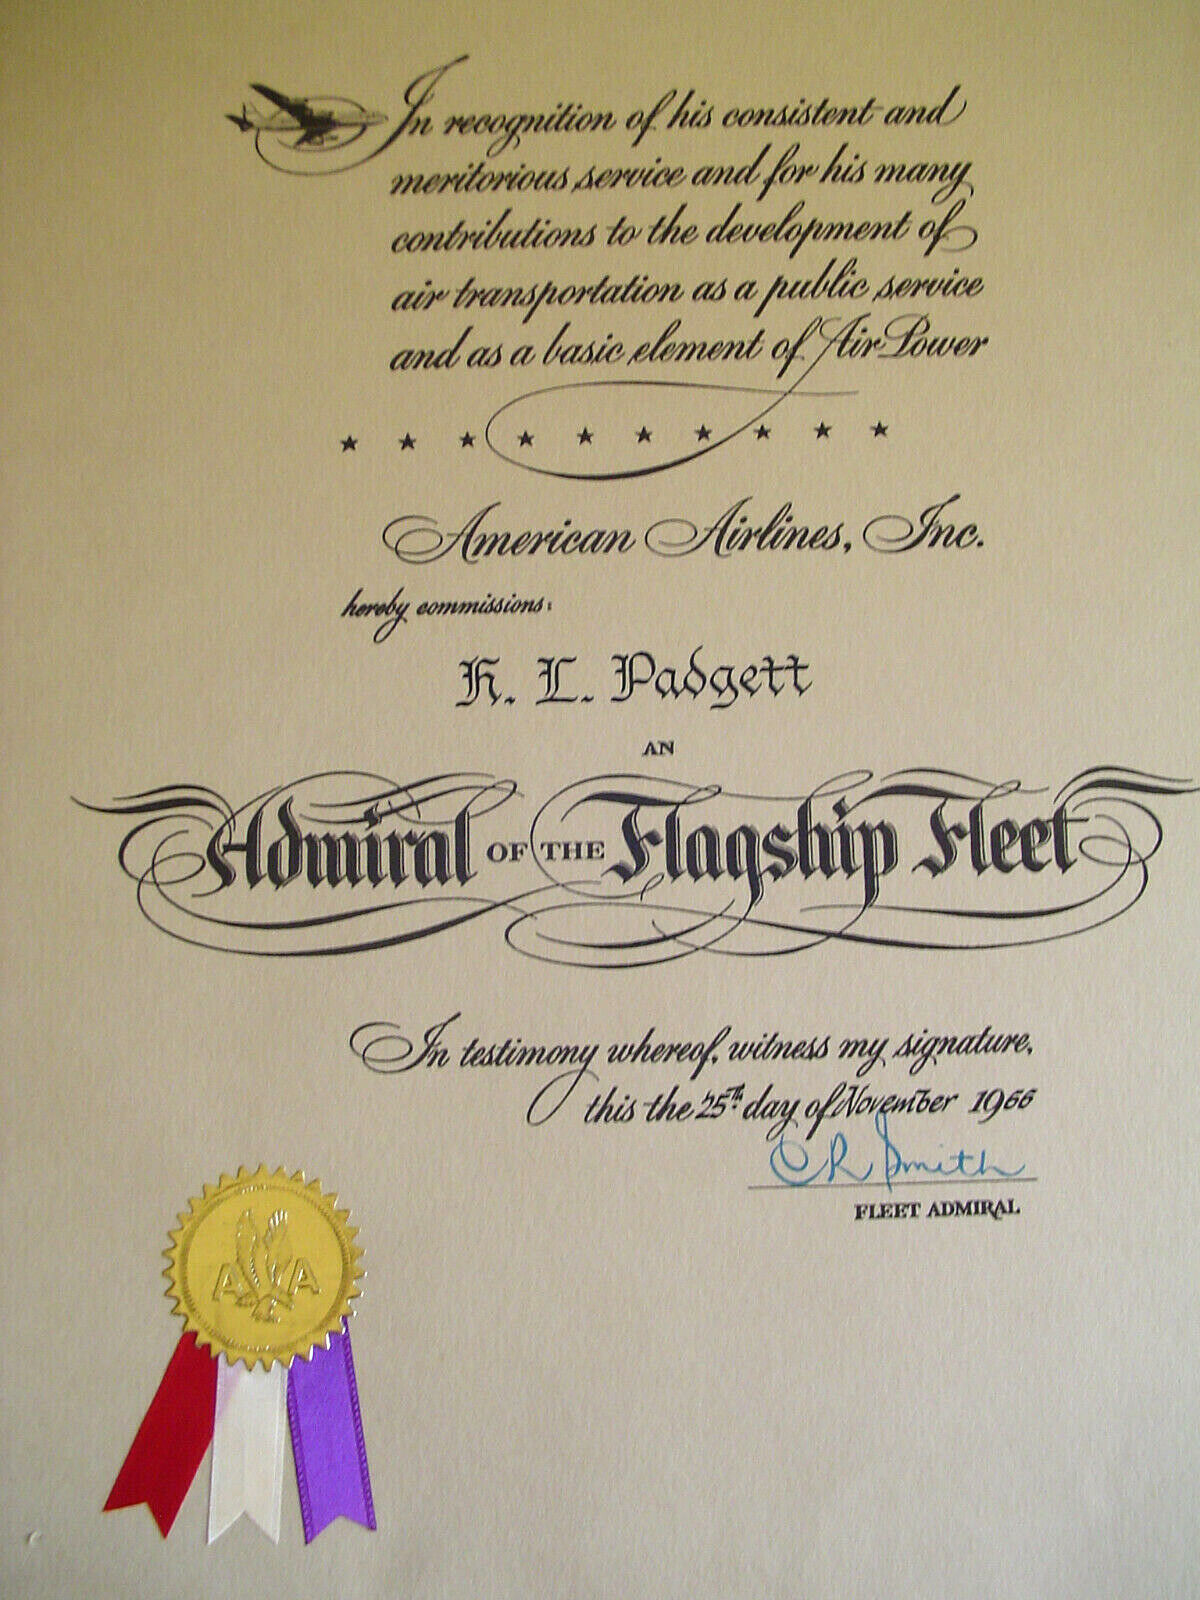 1966 VINTAGE AMERICAN AIRLINES ADMIRAL OF THE FLAGSHIP FLEET CERTIFICATE